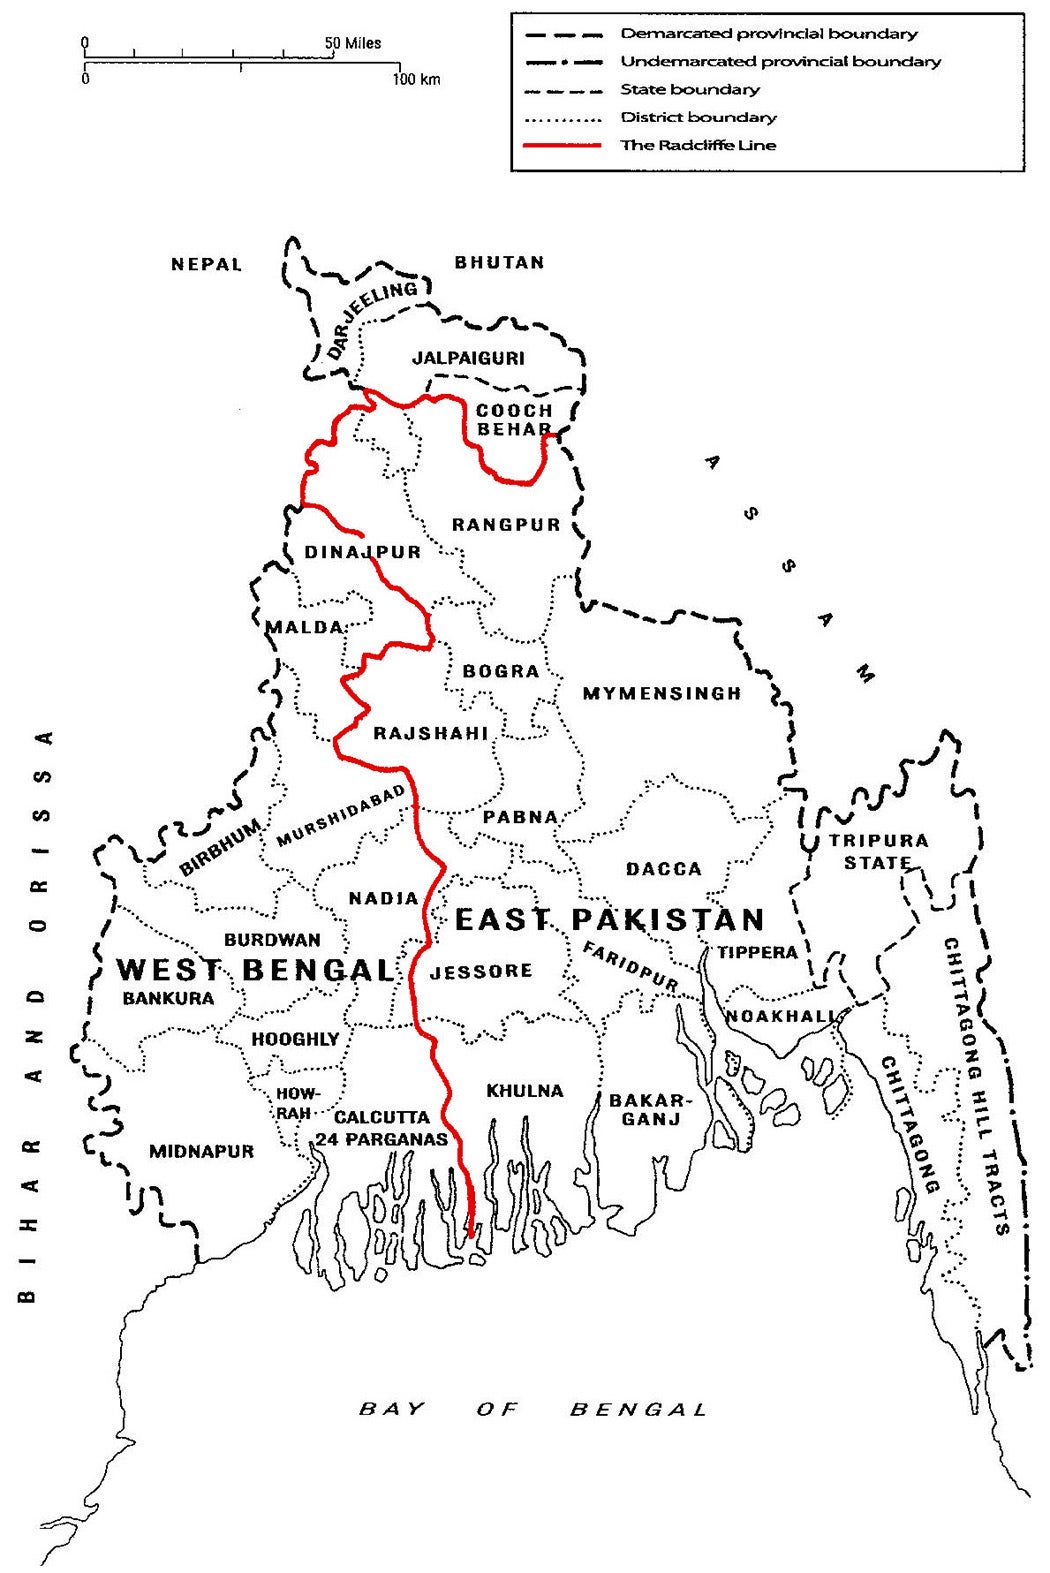 The Radcliffe Line between West and East Bengal, 1947